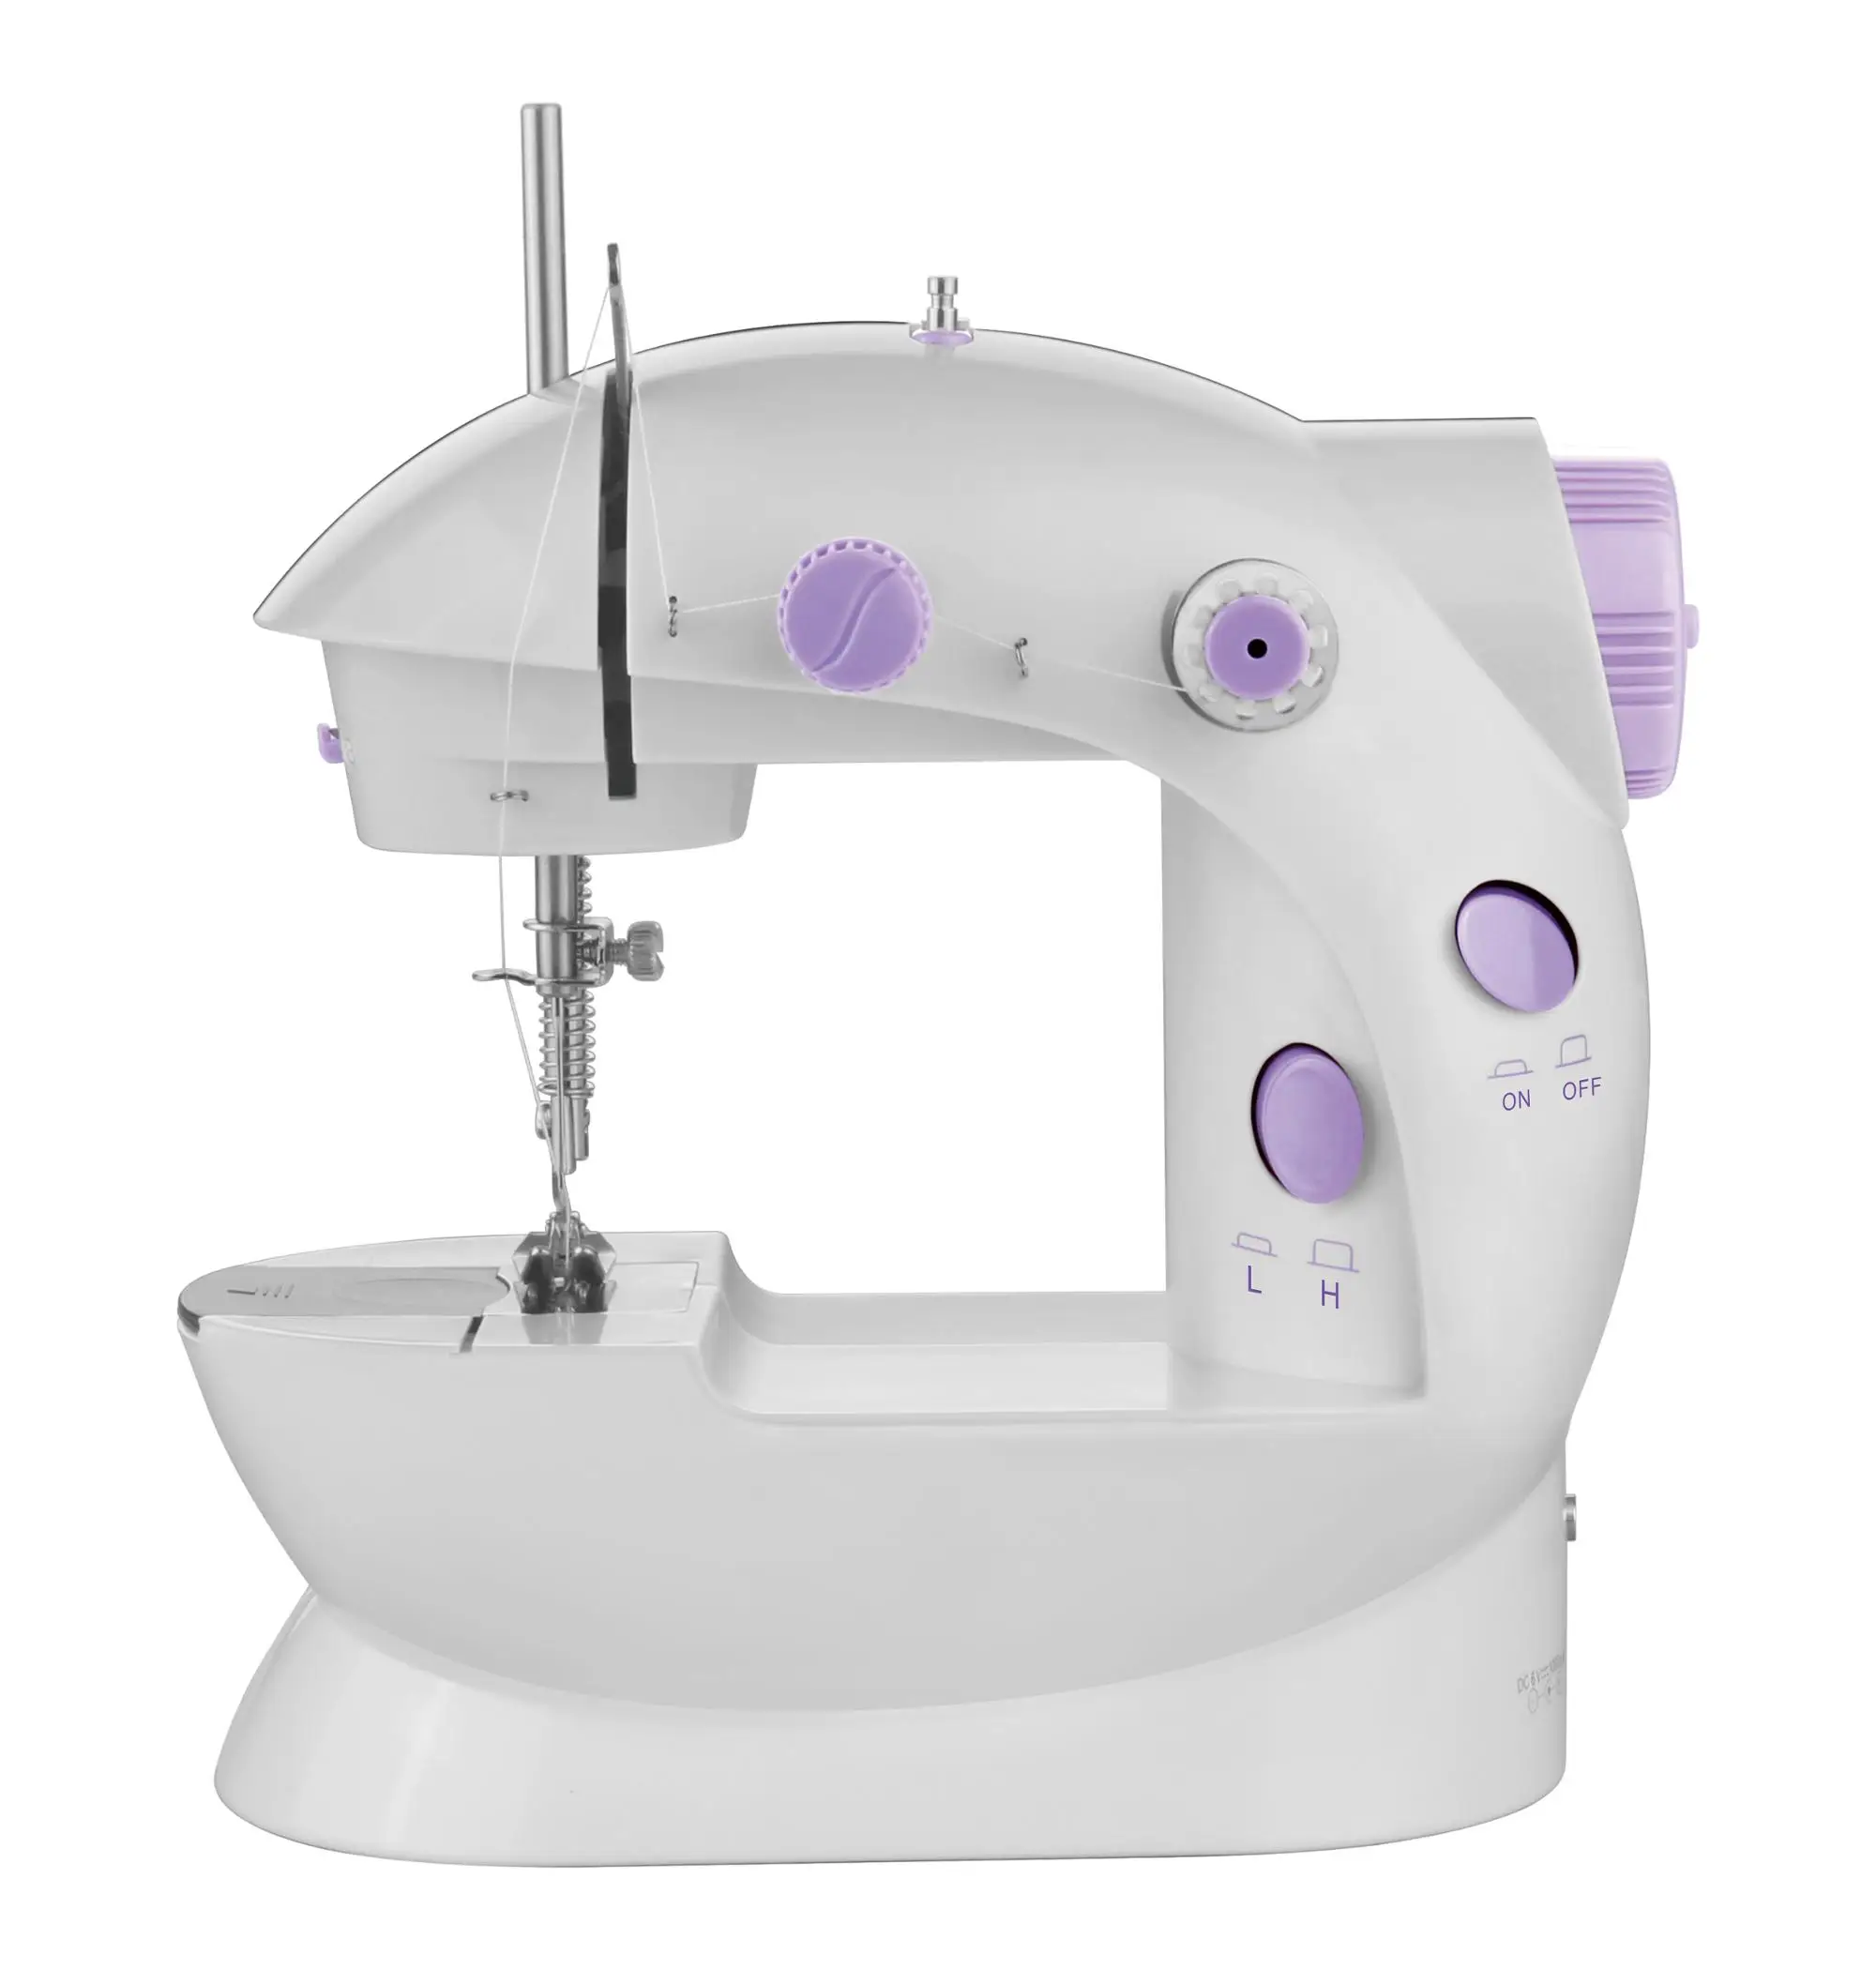 FHSM-202 stitching electric portable manual hand held household mini sewing machine with CE/ROHS